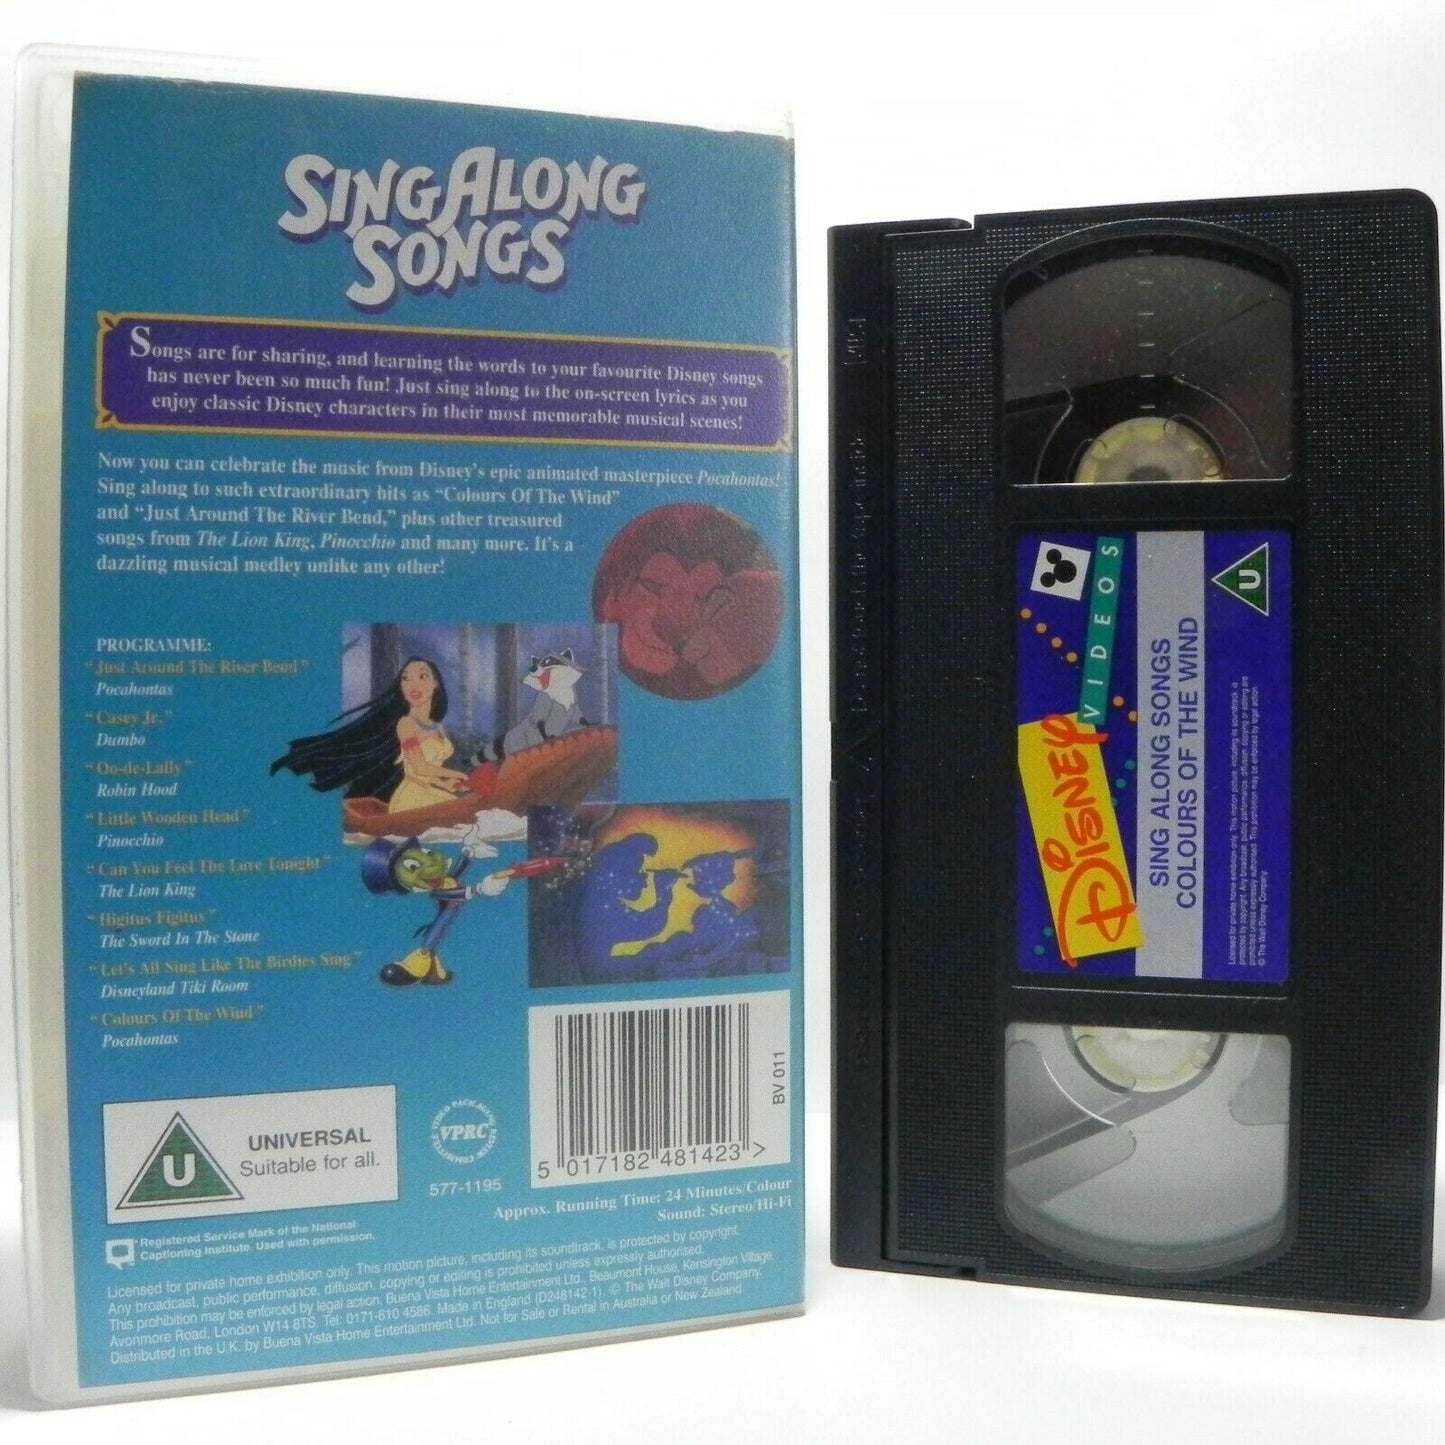 Disney Sing Along Songs: Colours Of The Wind - Pocahontas - Children's - VHS-